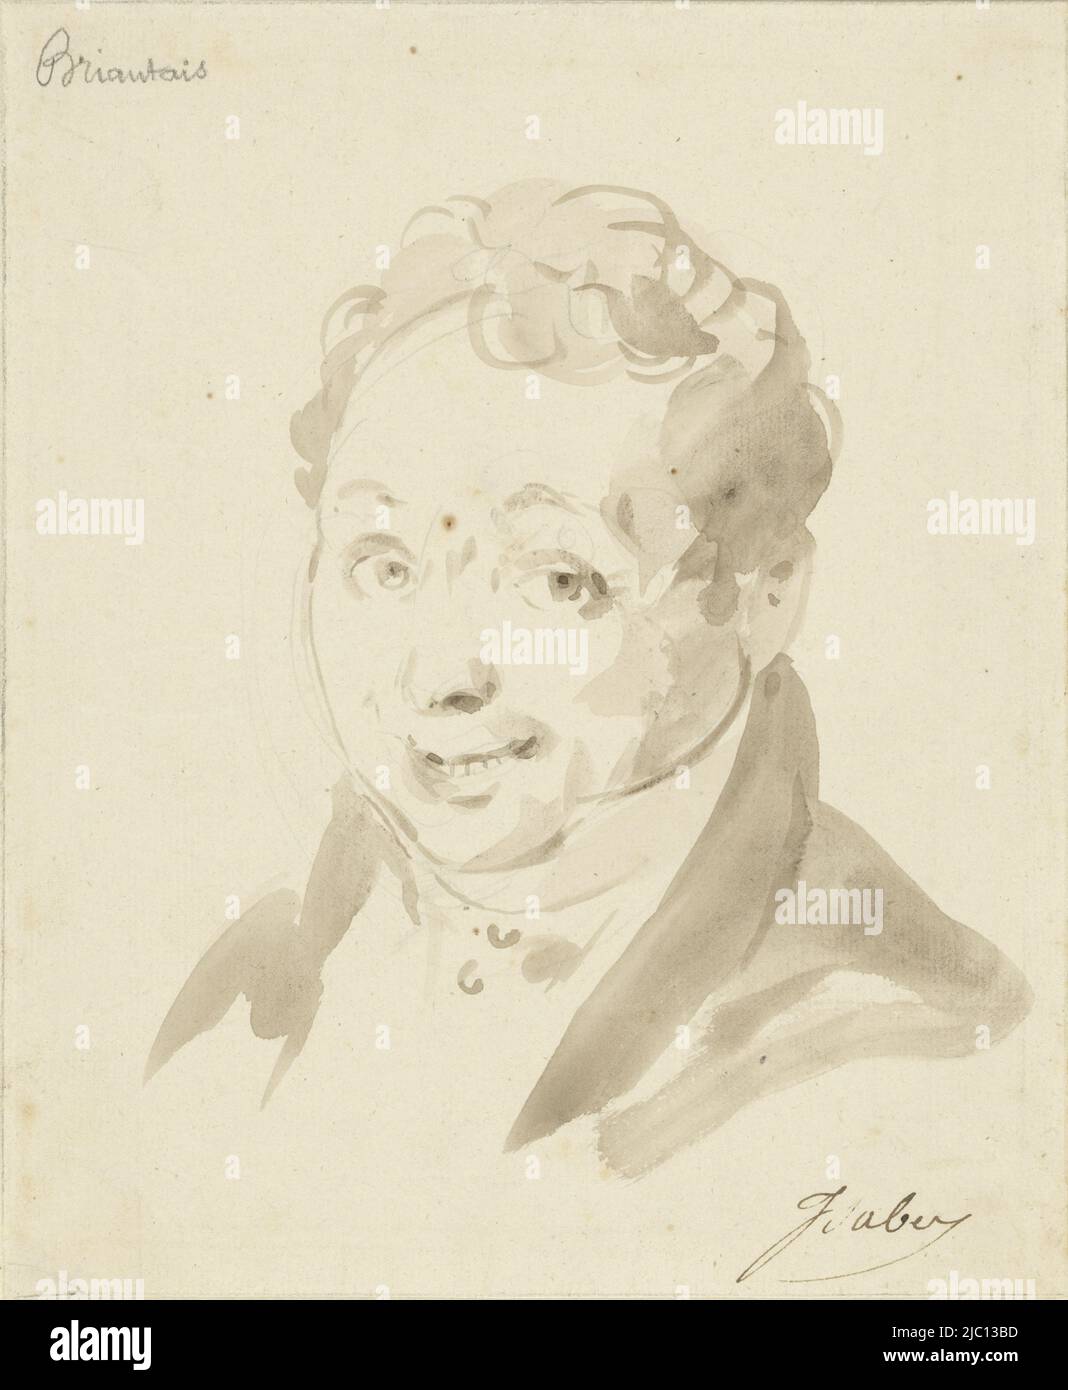 Portrait caricature of Briantais, draughtsman: Jean Baptiste Isabey, 1777 - 1855, paper, brush, h 178 mm × w 147 mm Stock Photo